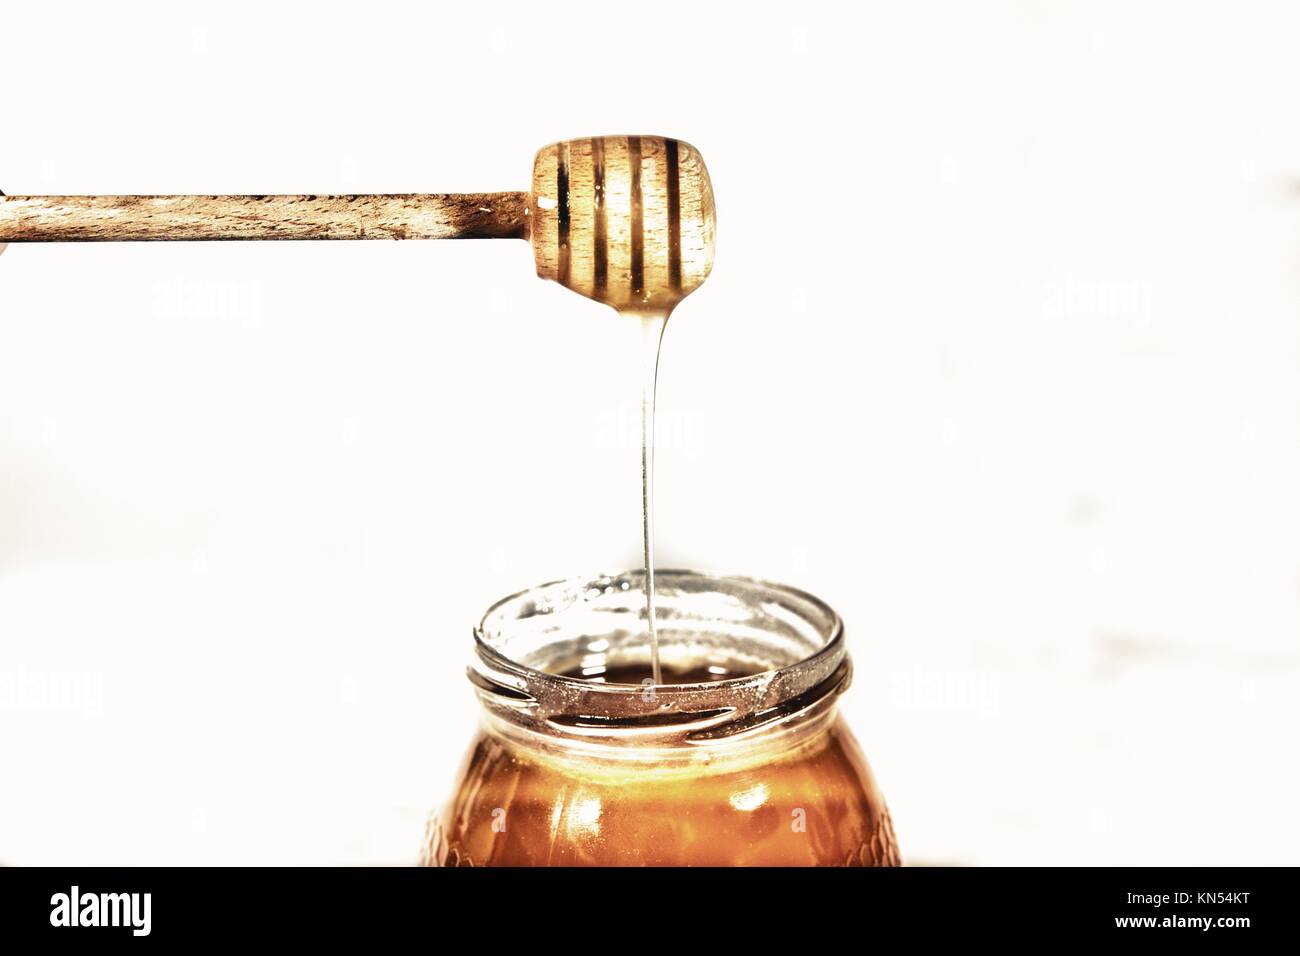 Delicious Alcarria Spanish honey and honey stick isolated over white background. Stock Photo